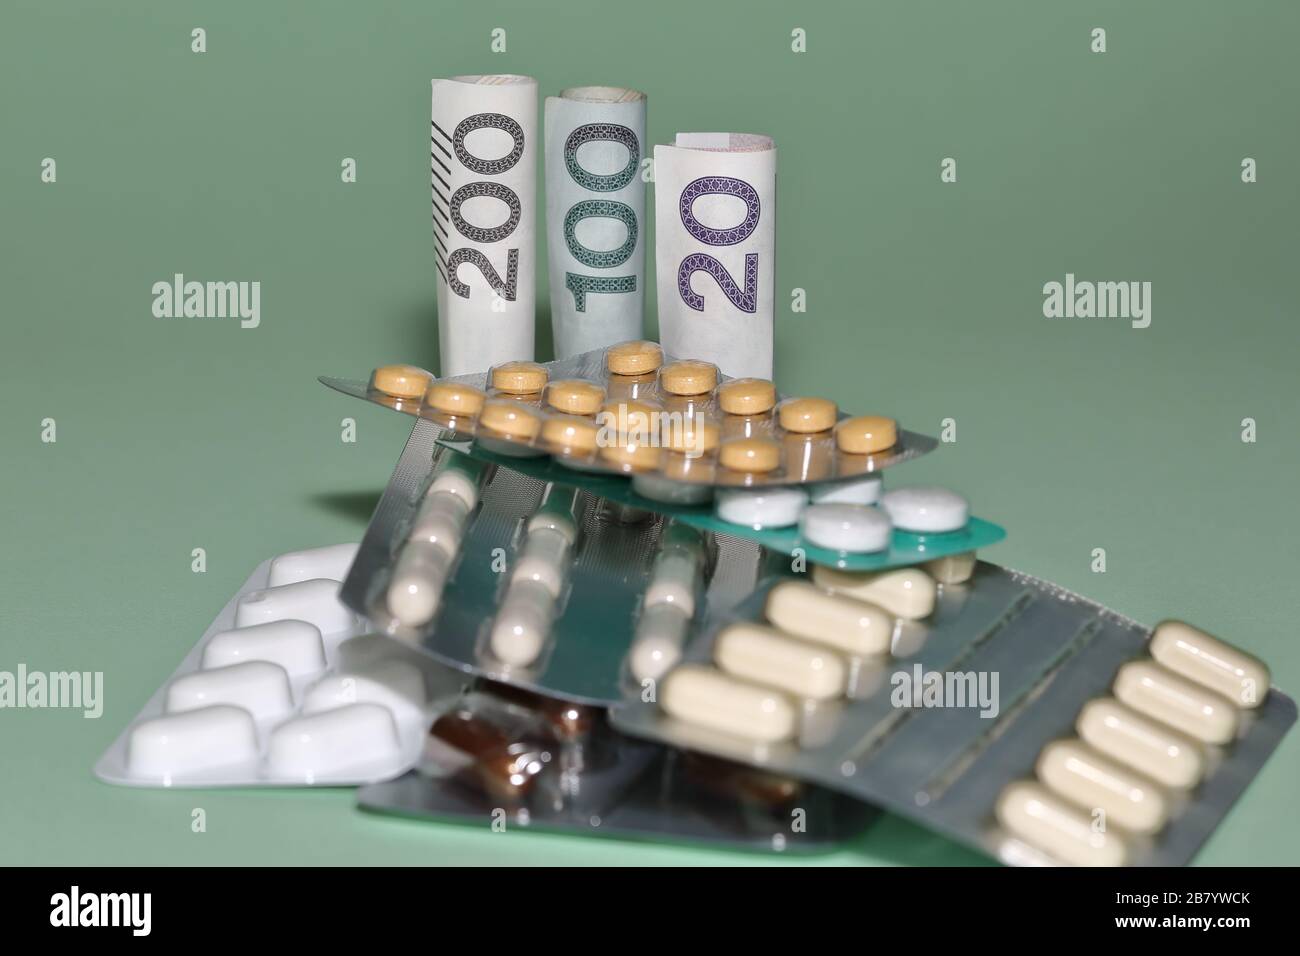 100 Capsules High Resolution Stock Photography And Images Alamy